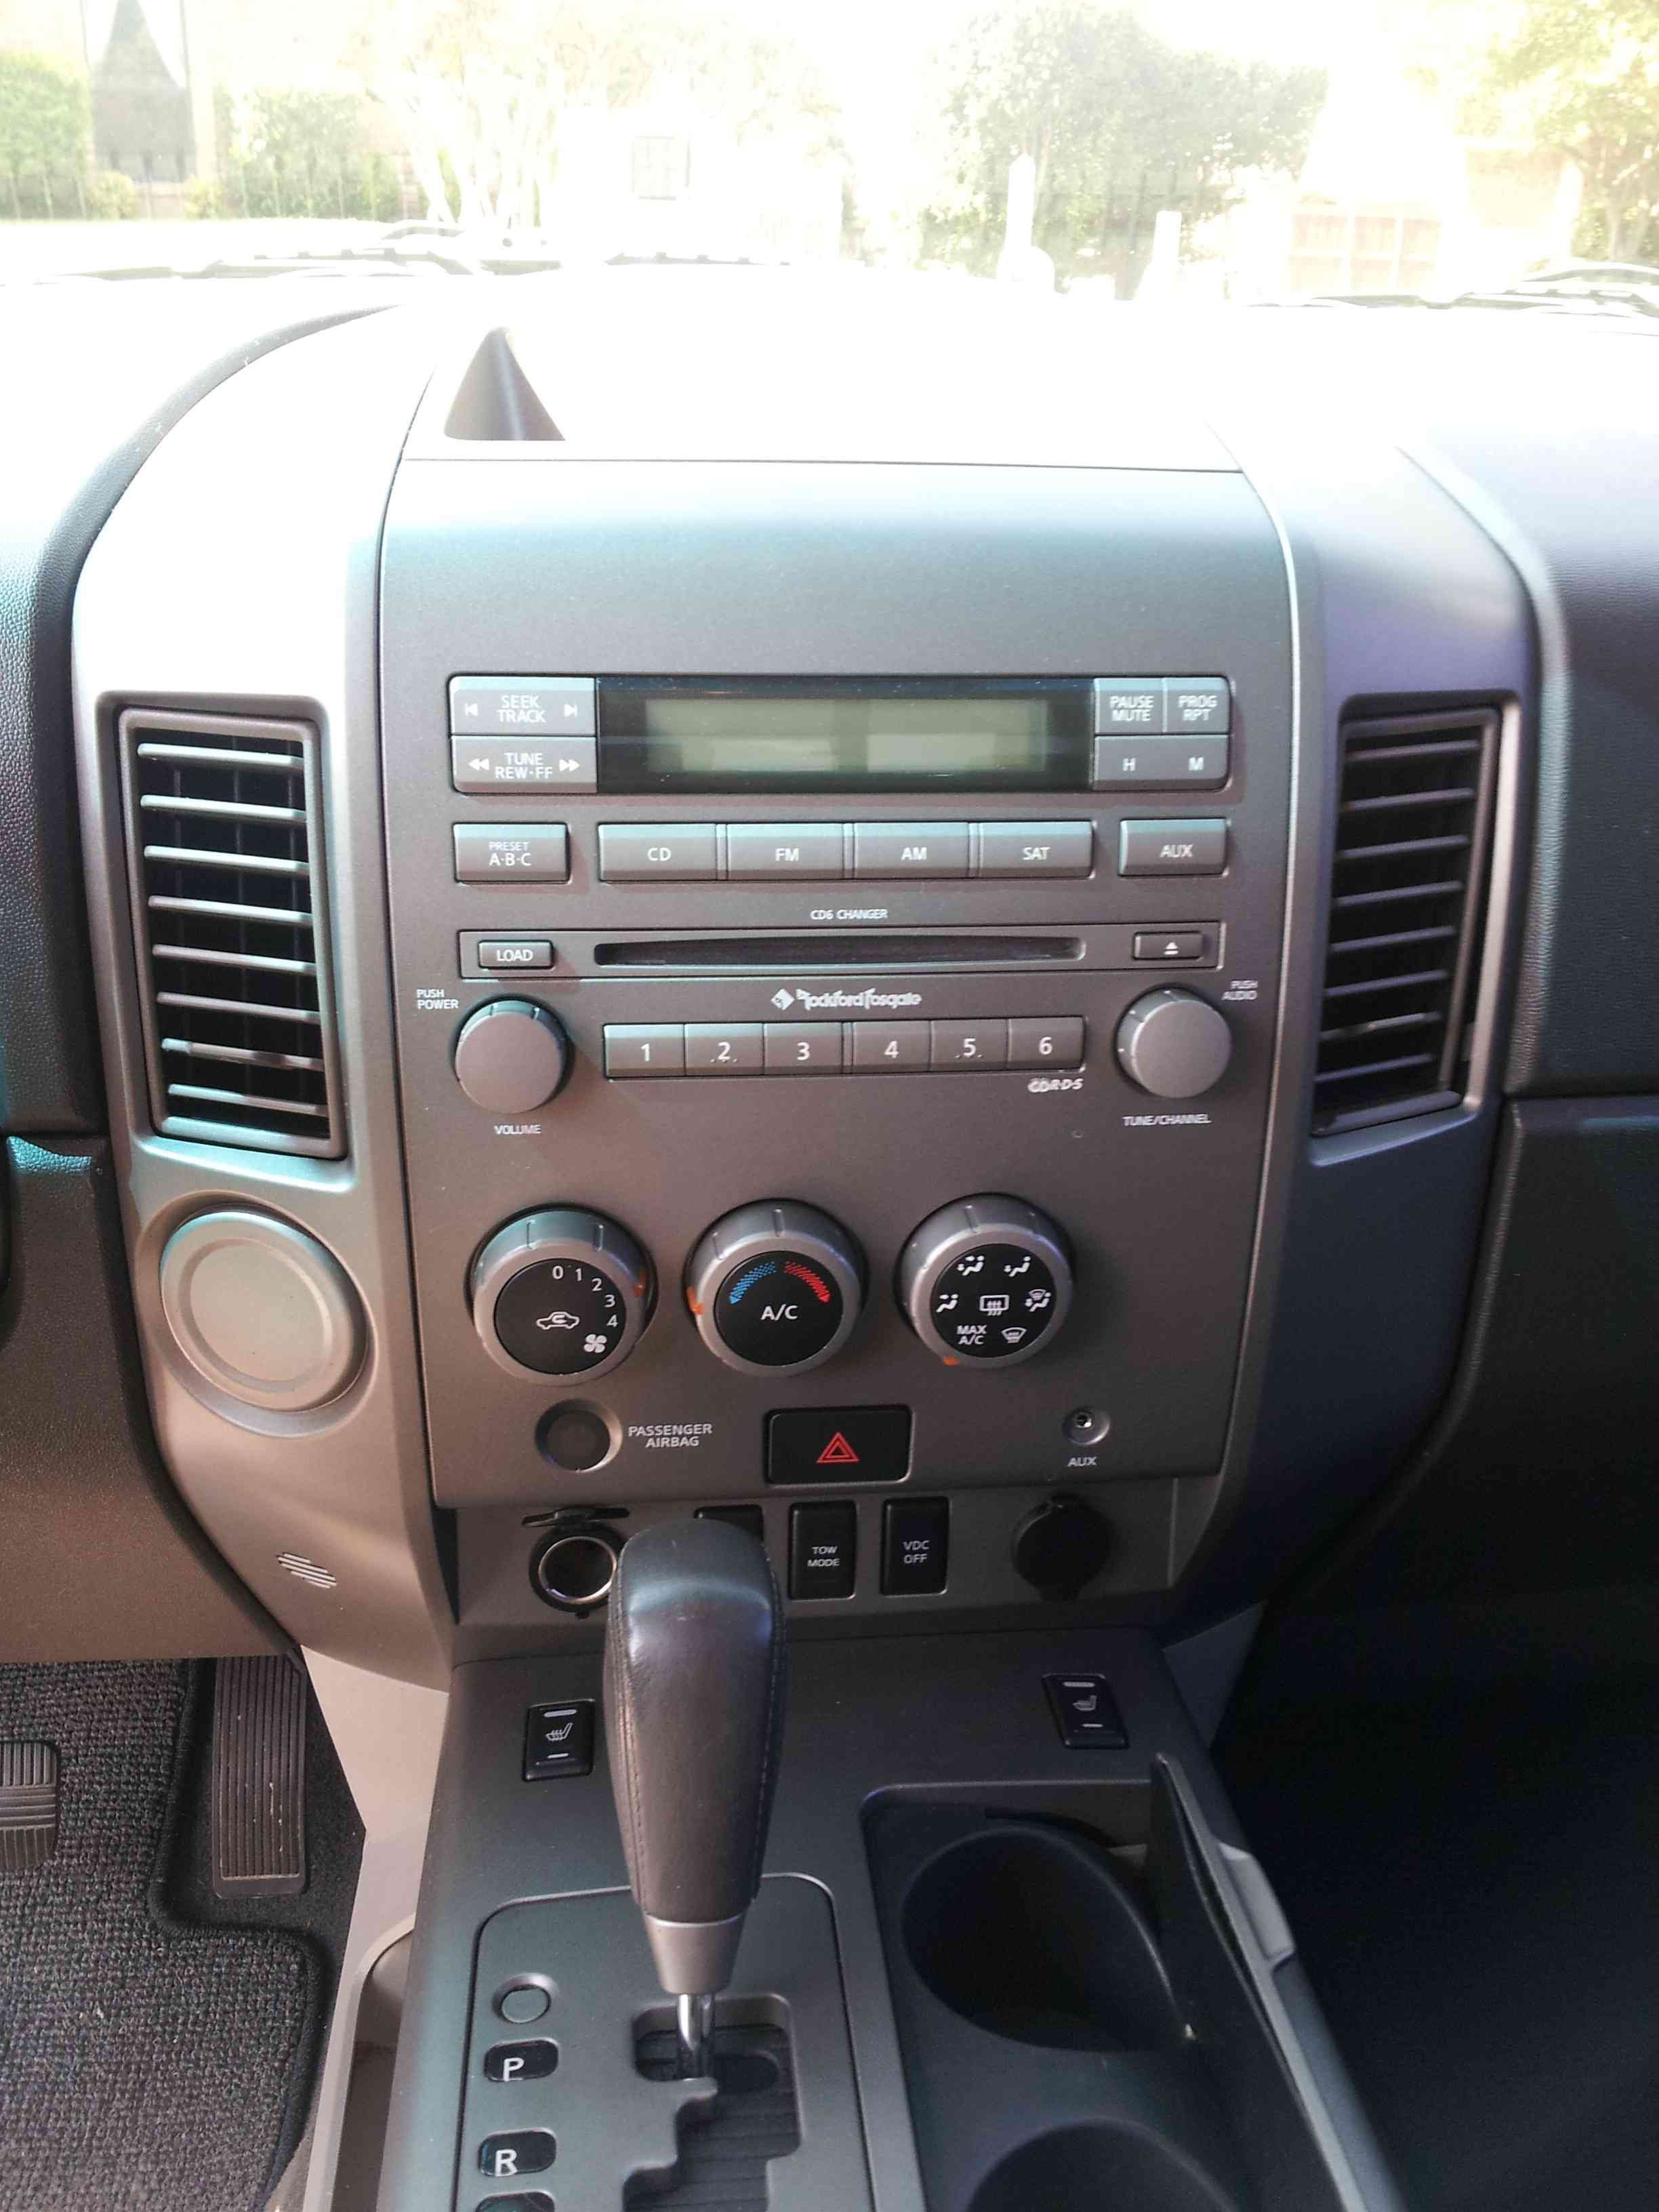 2004 Nissan Titan Double Din Install Step By Step Nissan